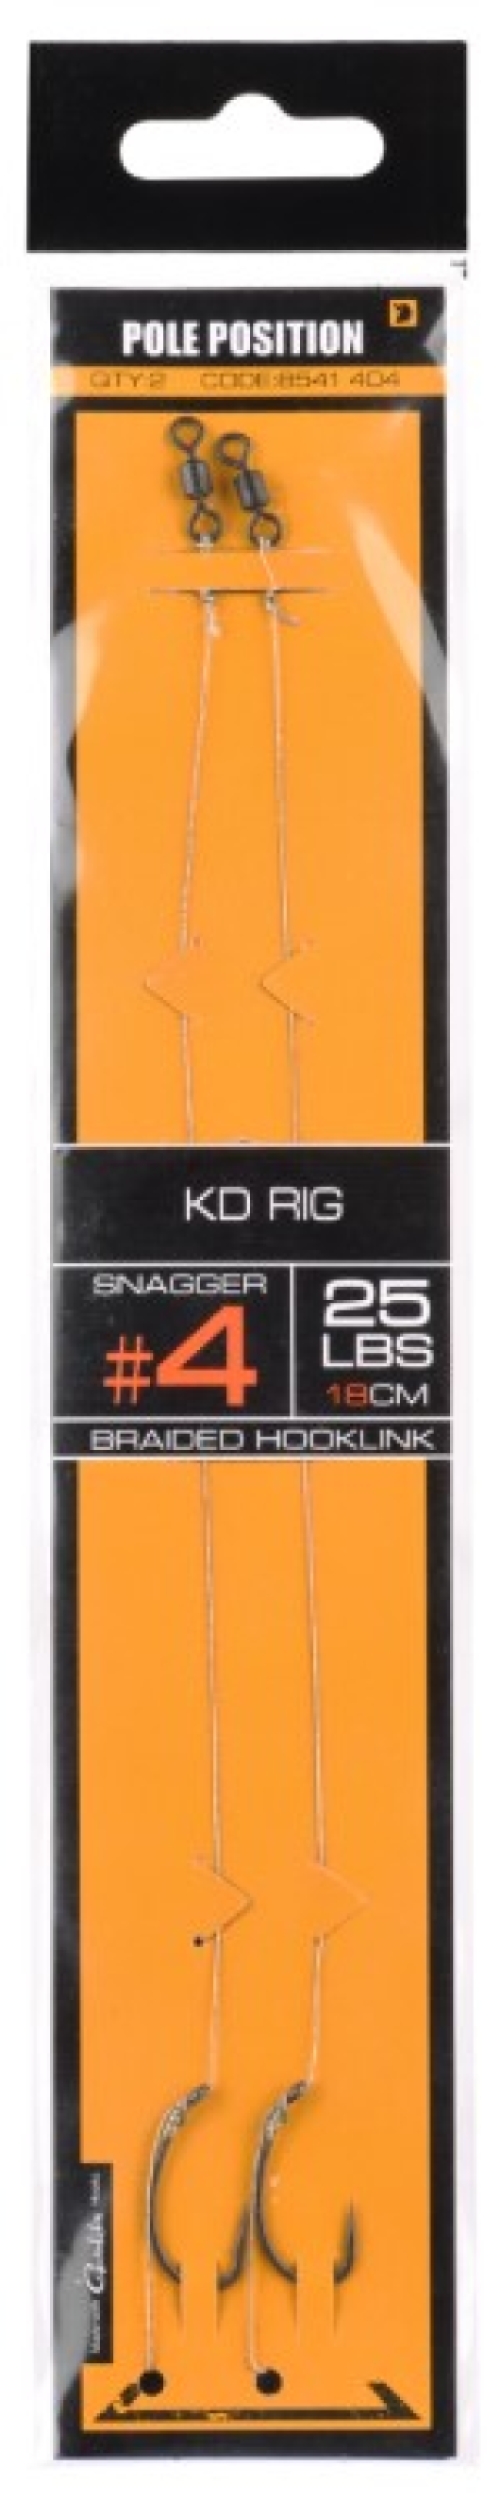 Pole Position KD Rig